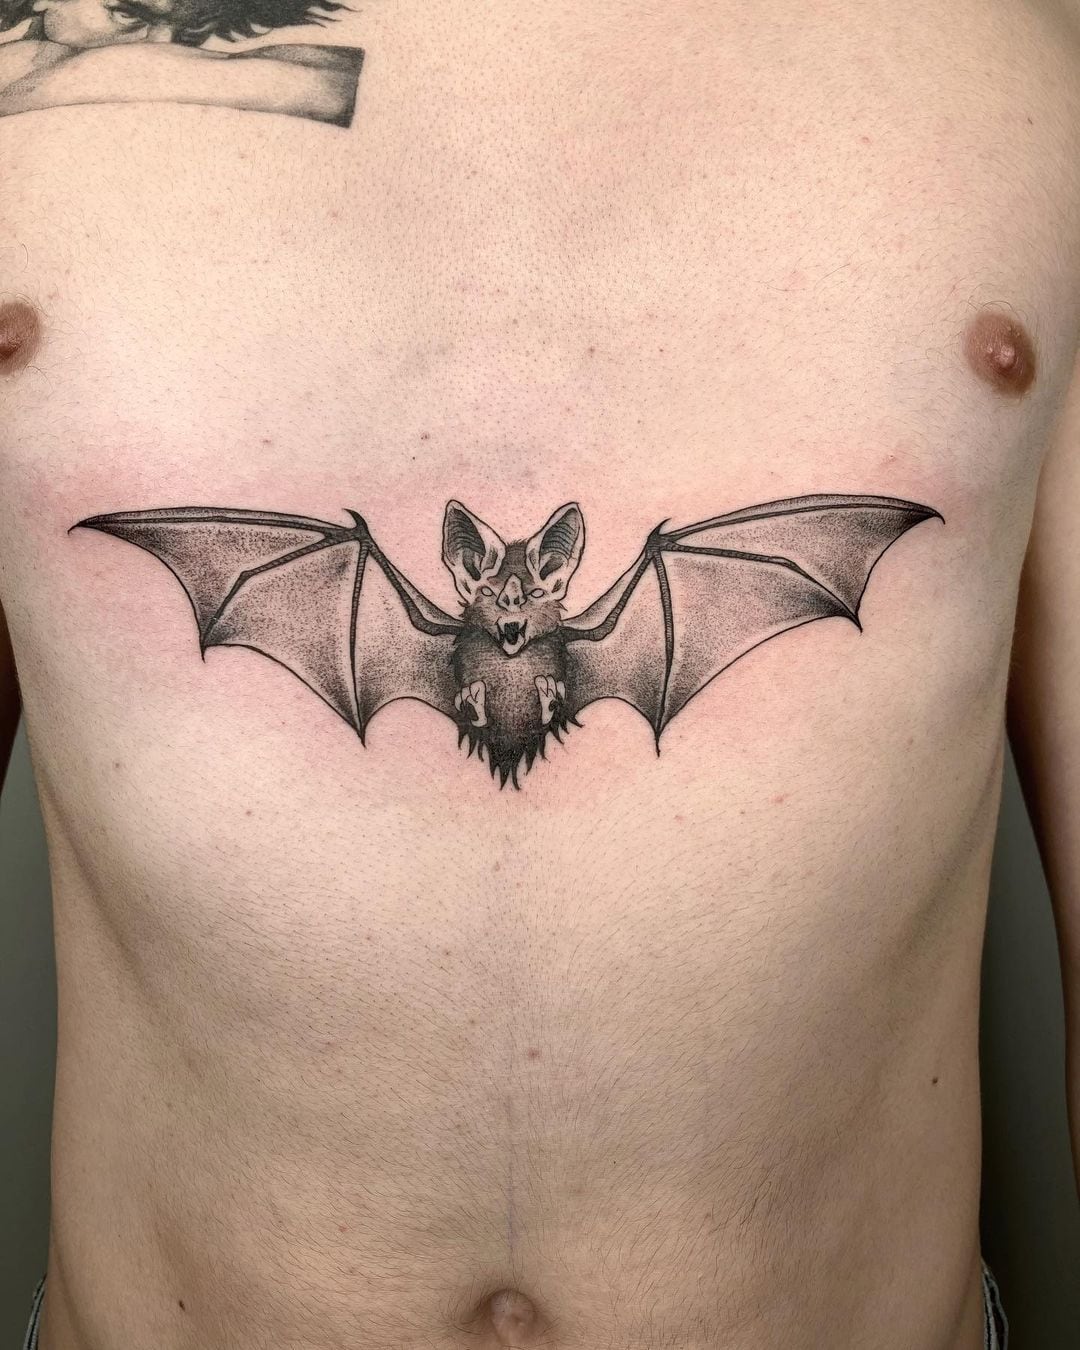 Bats, Beauty, And Beyond: Exploring The Artistry Of Xia Tattoo